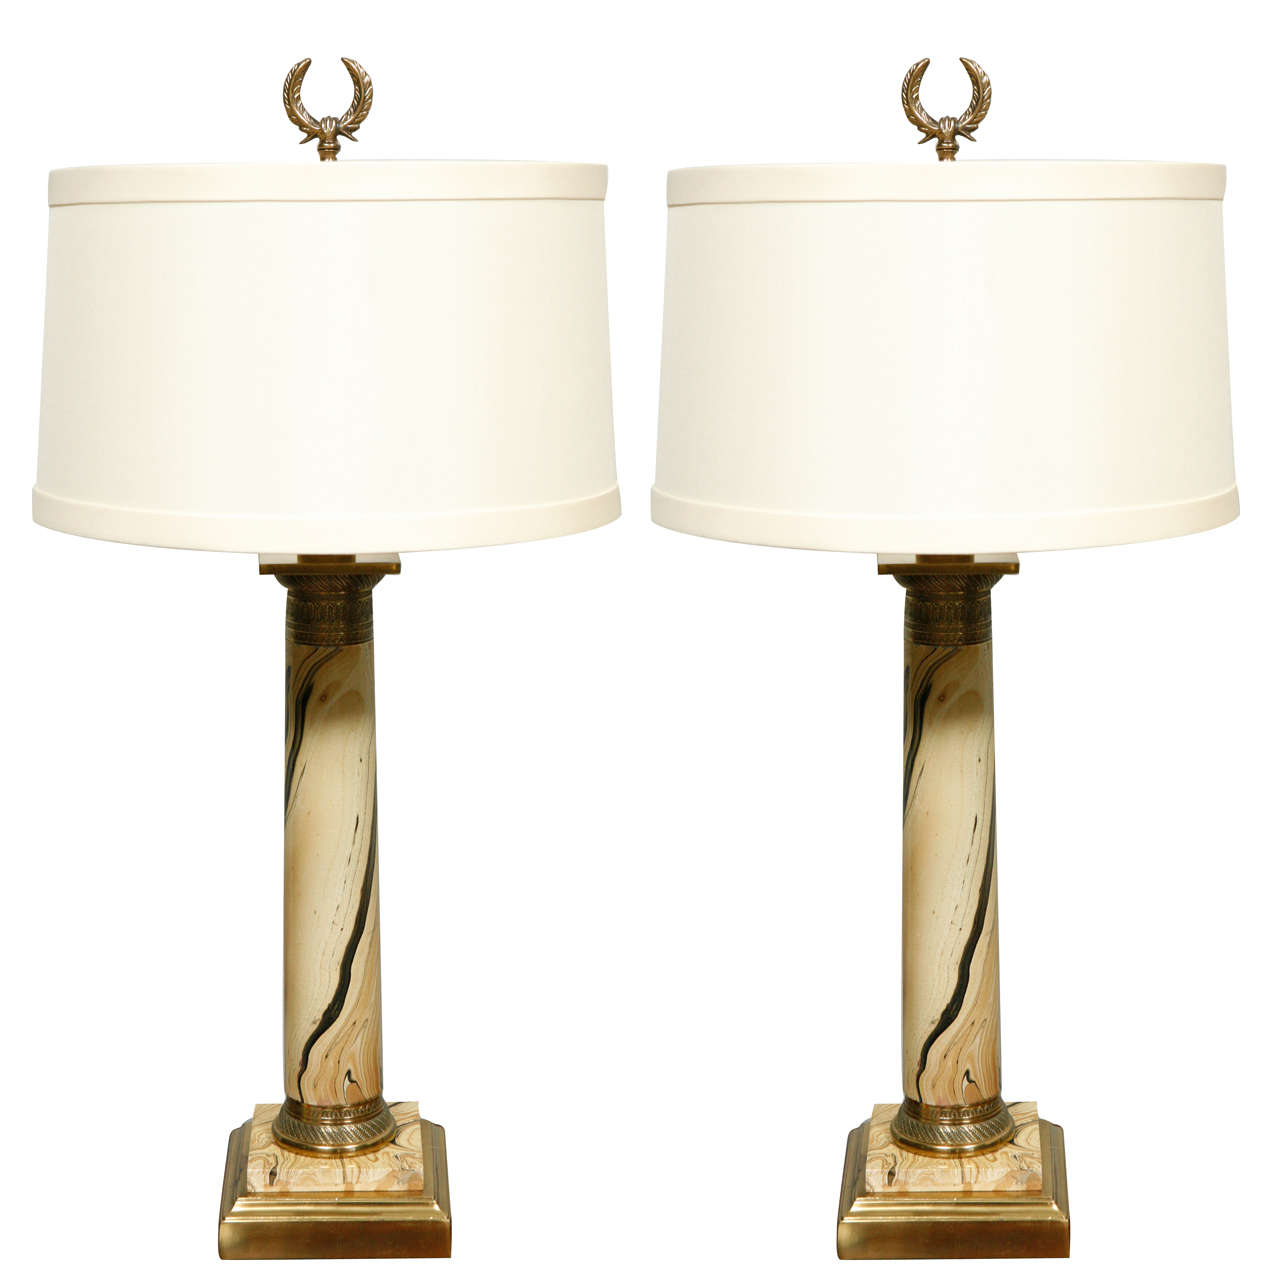 1920's French Pair of Table Lamps